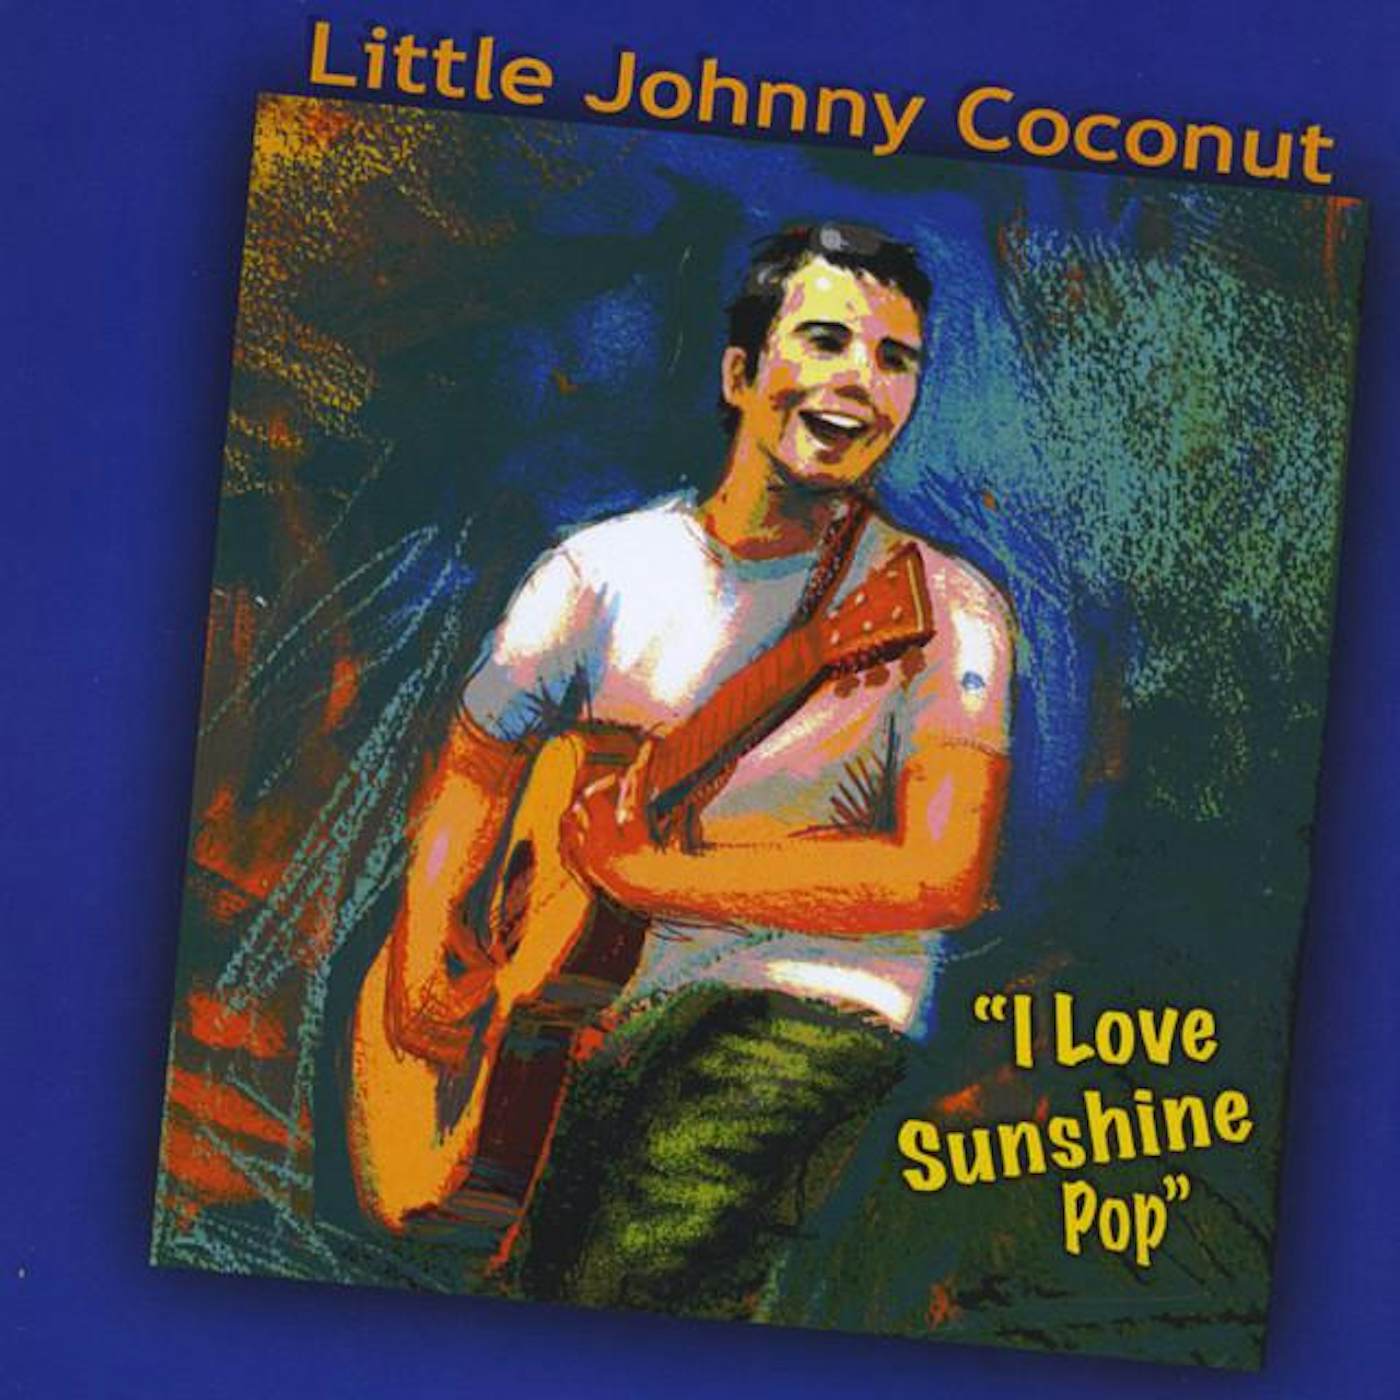 Little Johnny Coconut